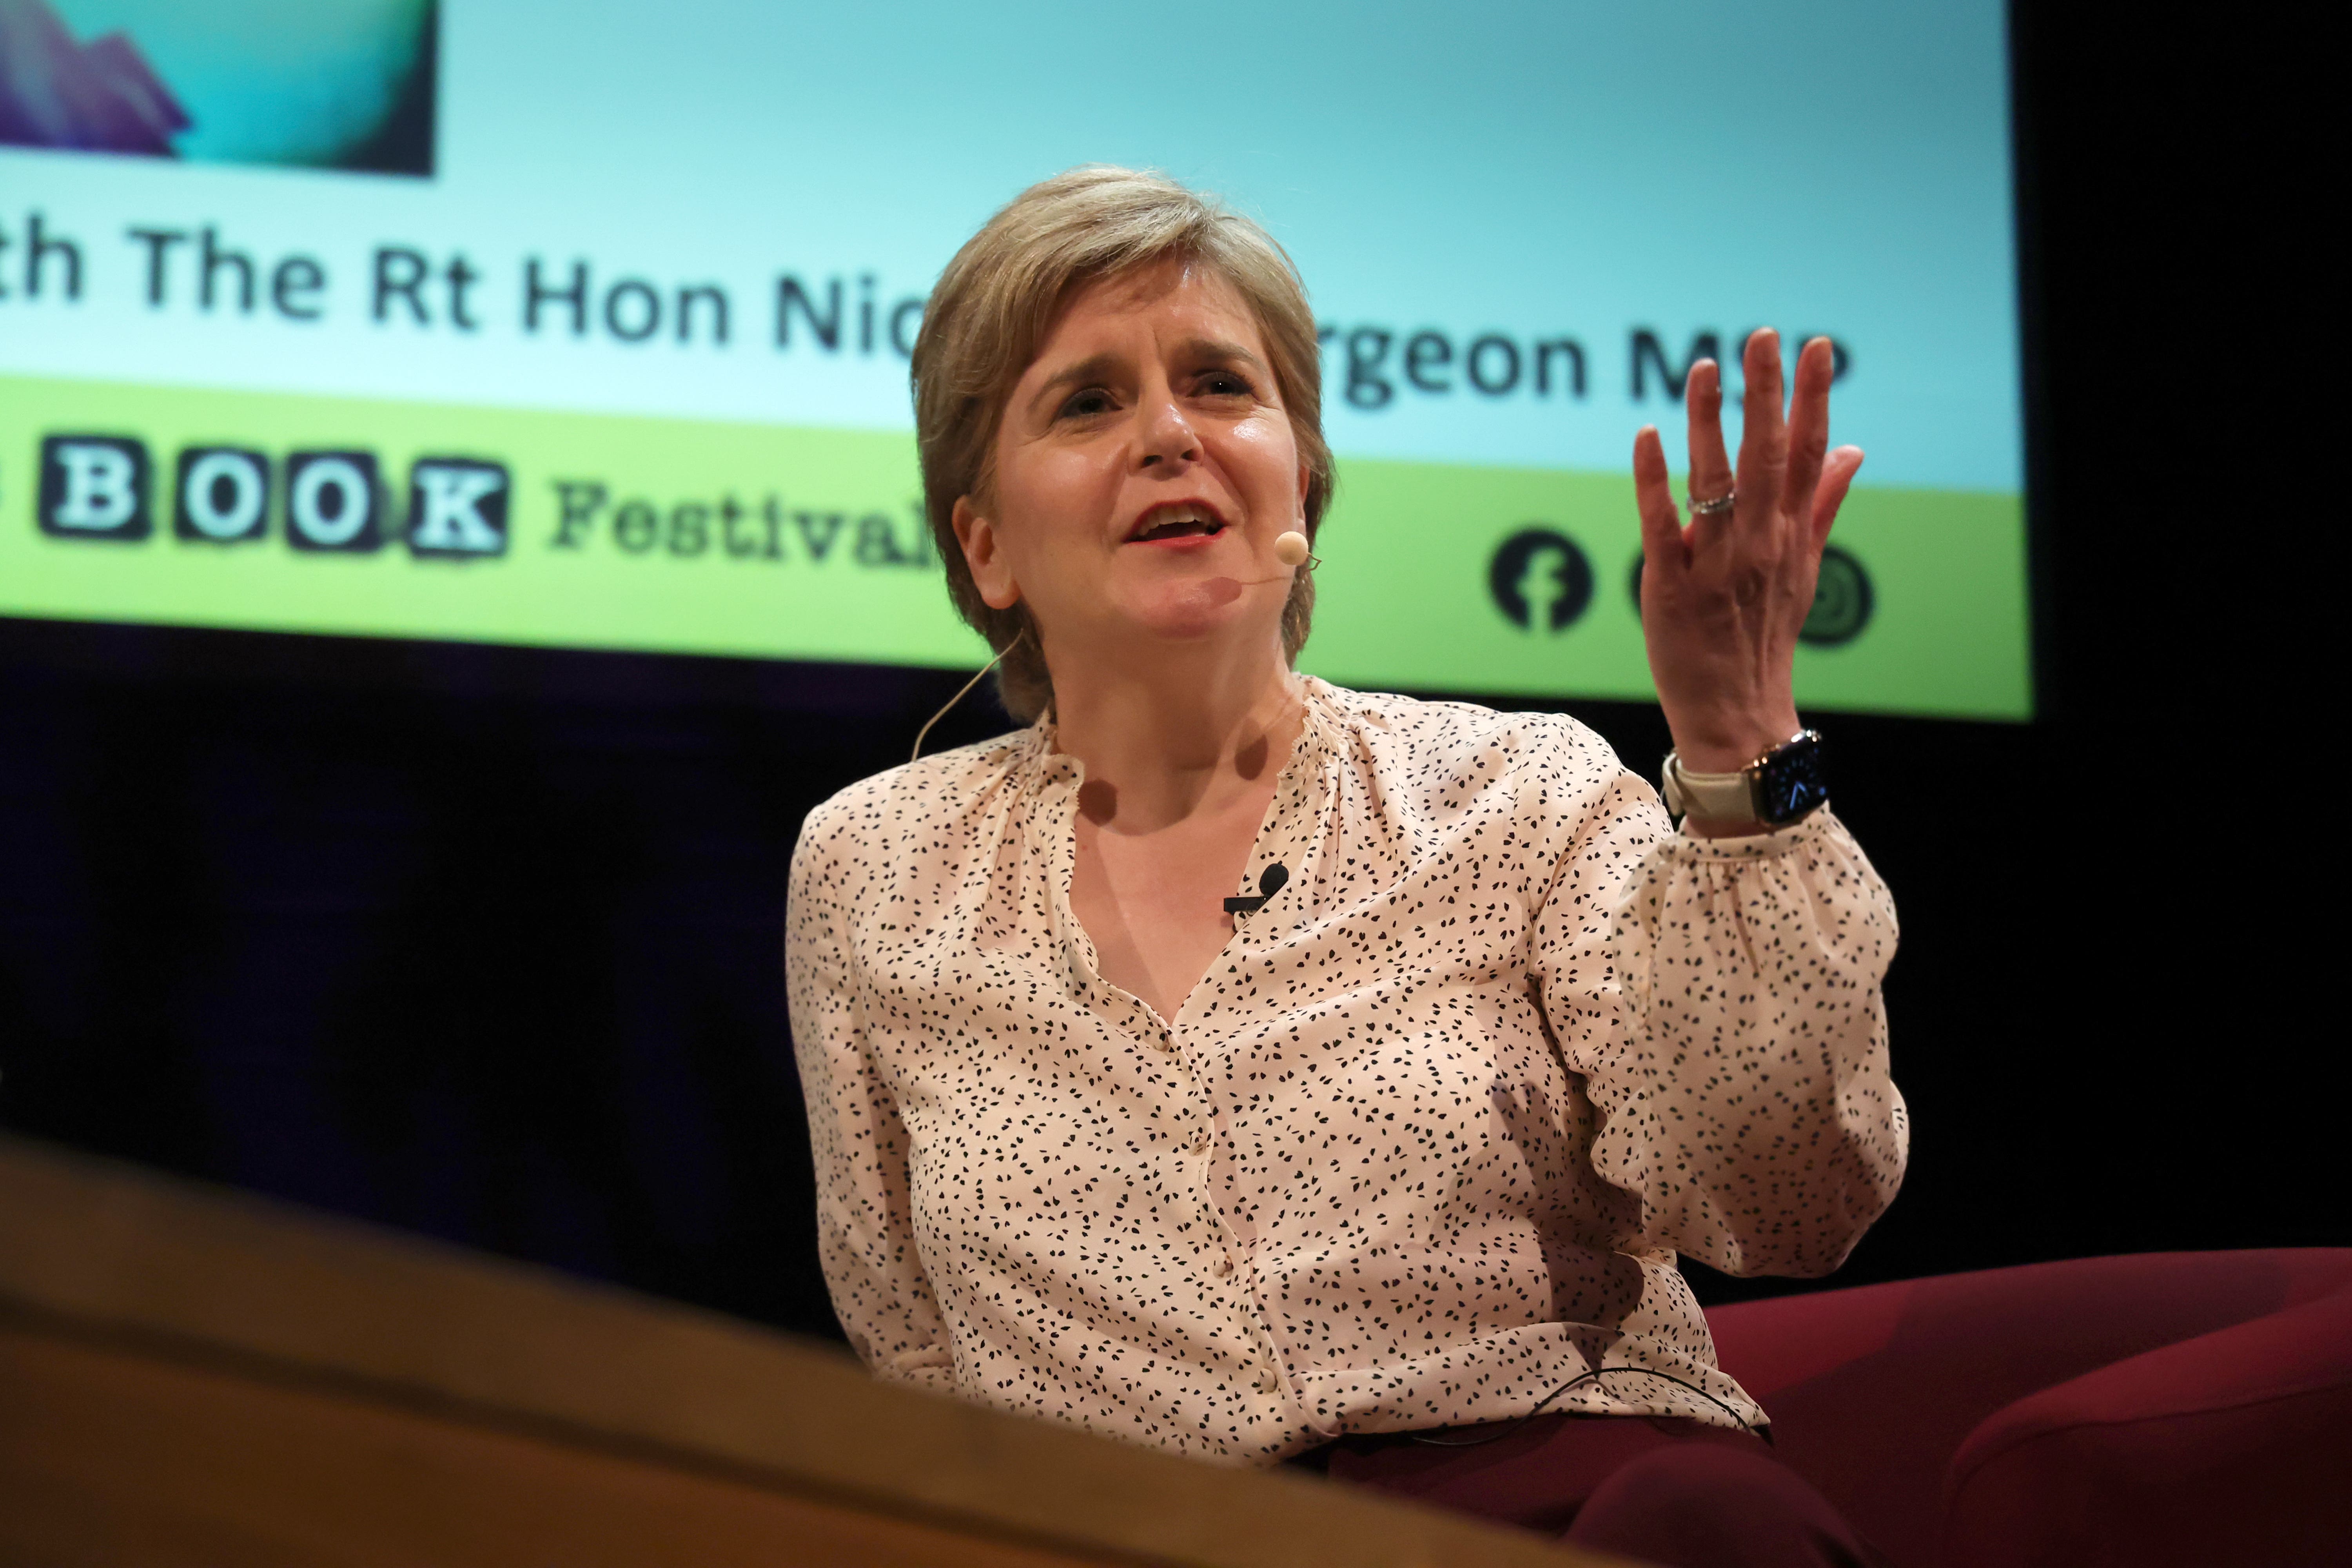 Former first minister Nicola Sturgeon chairs an event with comedian Janey Godley (not pictured) at the Aye Write book festival at the Royal Concert Hall, Glasgow. (Robert Perry/PA)